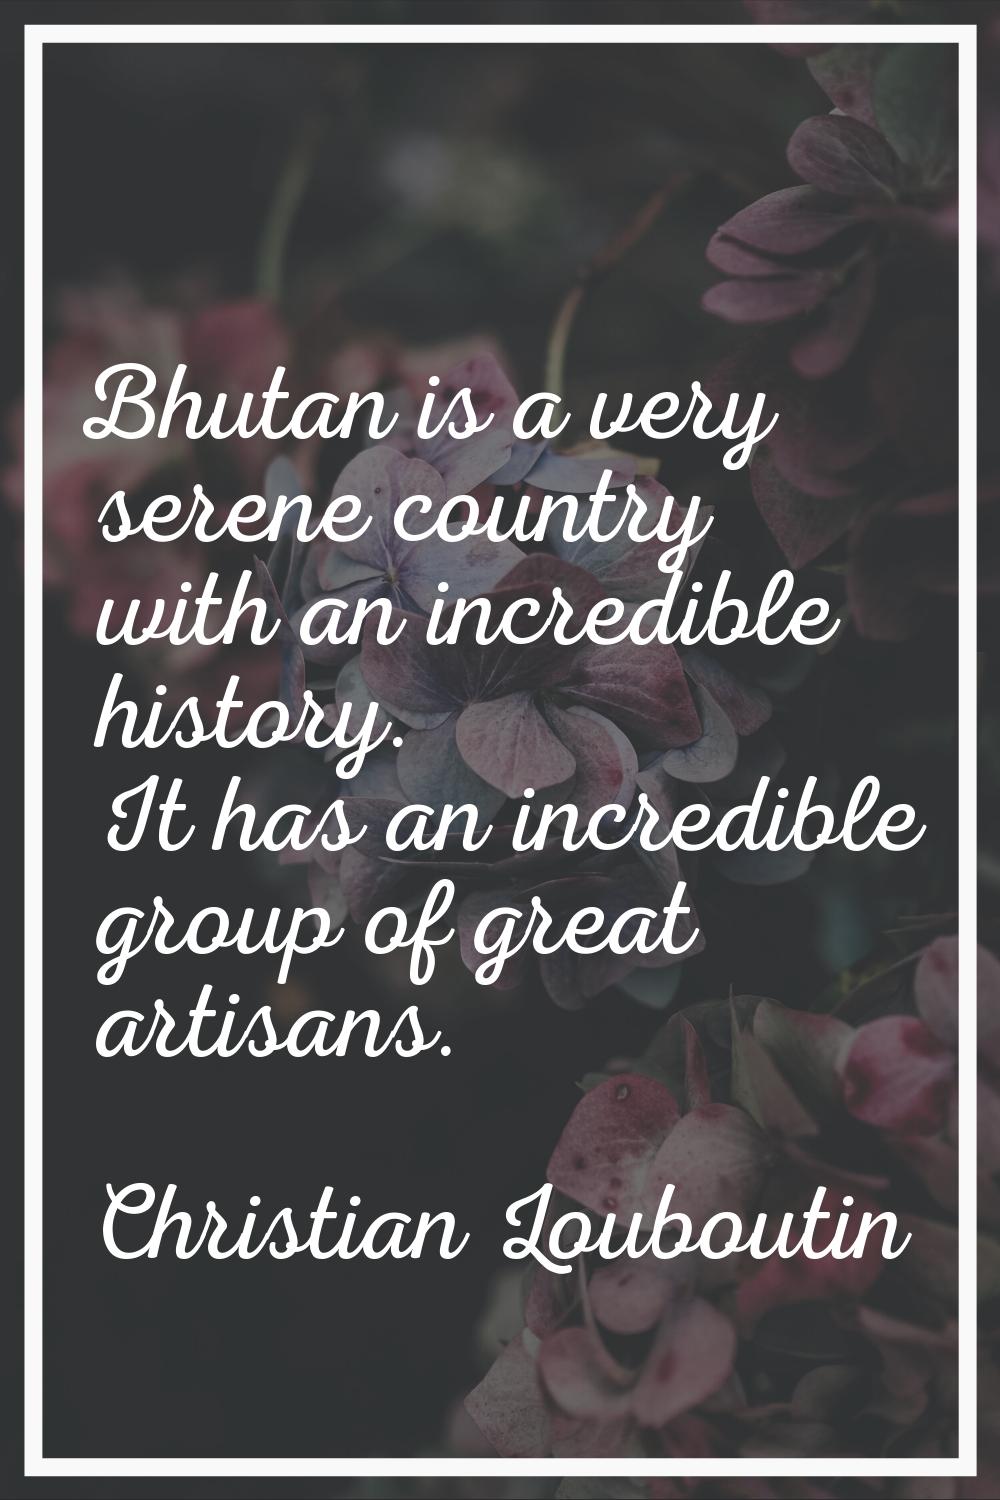 Bhutan is a very serene country with an incredible history. It has an incredible group of great art